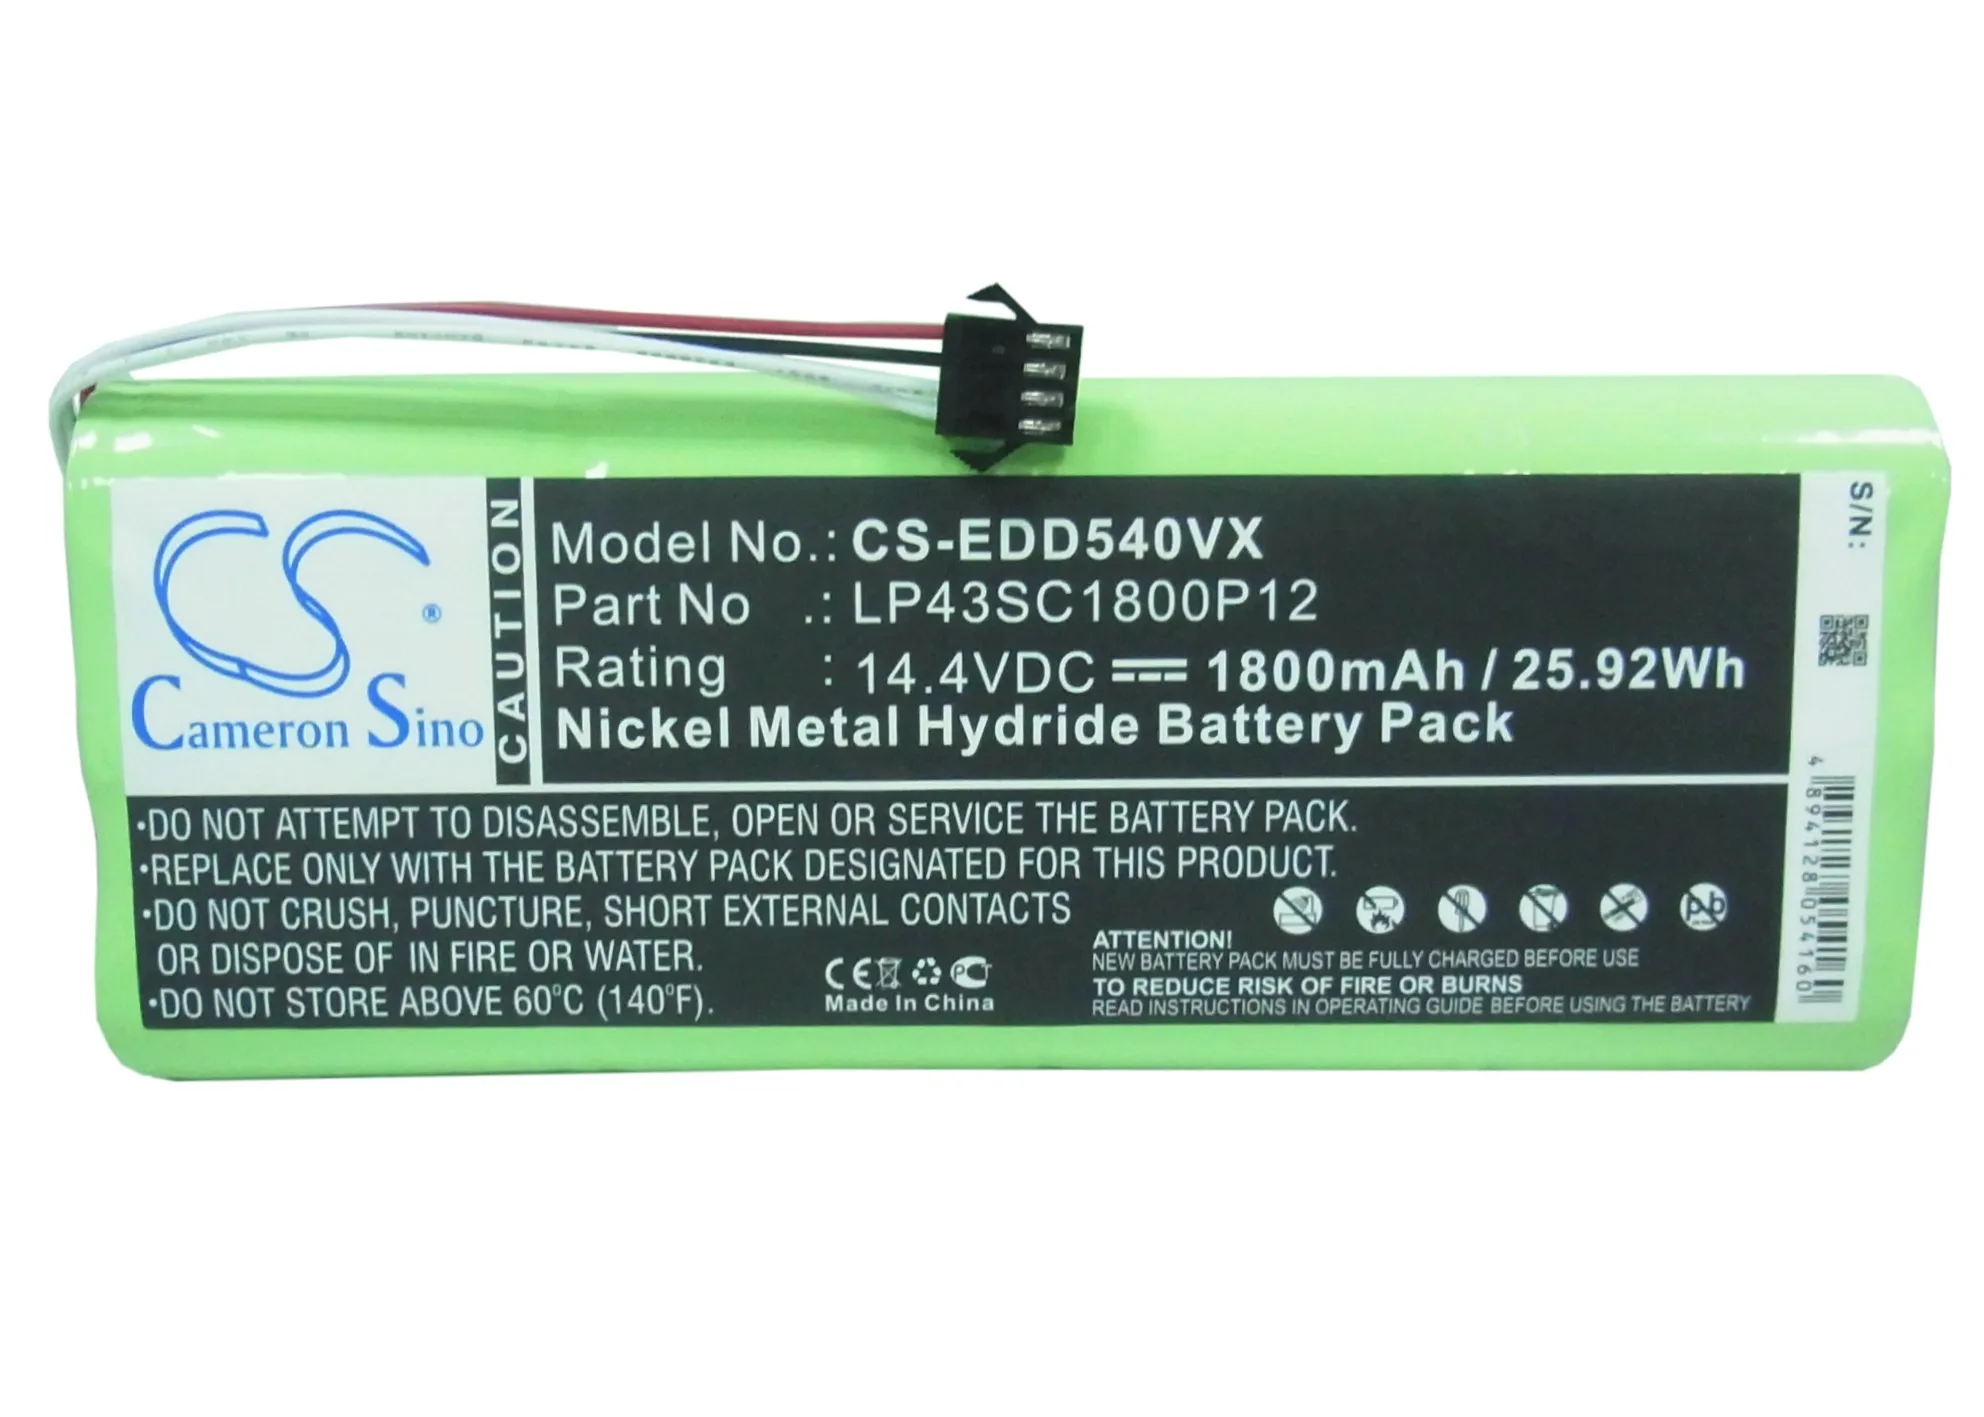 

Cameron Sino LP43SC1800P12 Battery for Ecovacs Deebot D523 Deebot D540 Deebot D550 Deebot D560 Deebot D570 Deebot D580